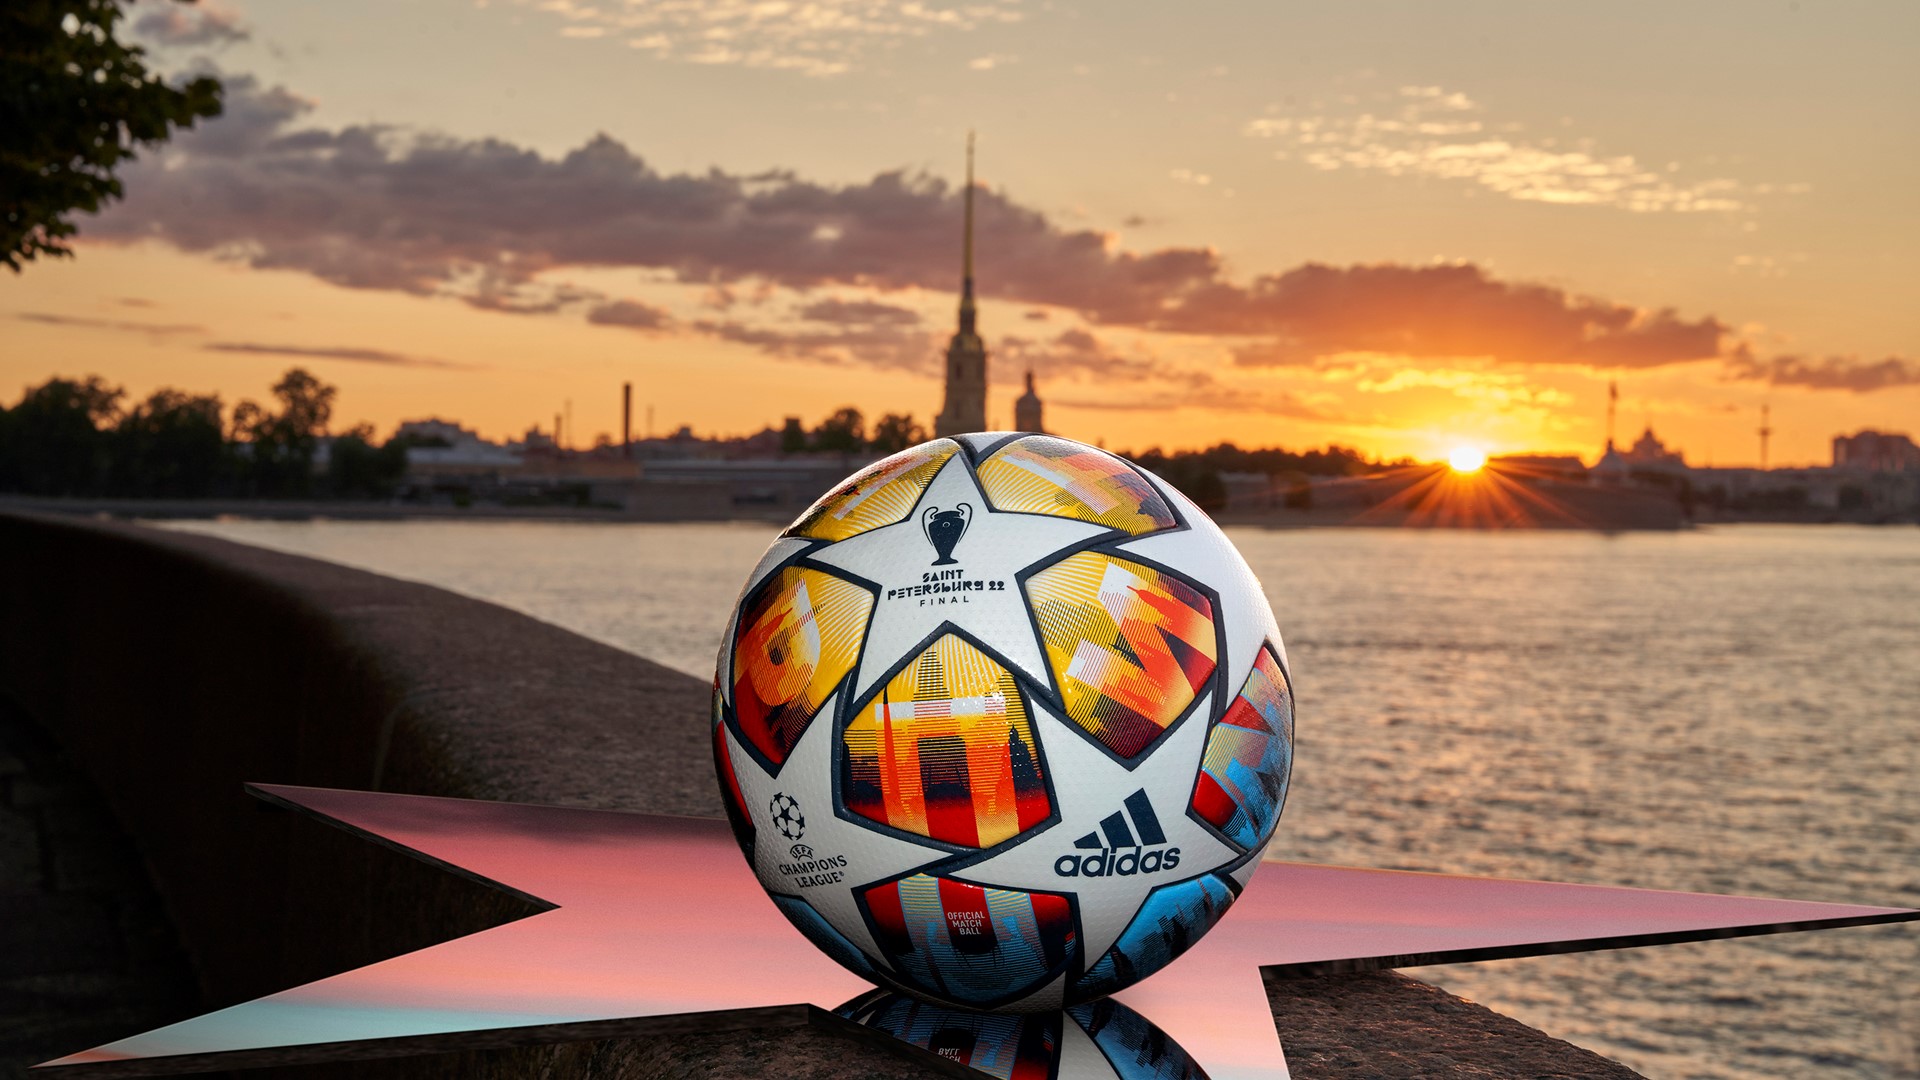 OFFICIAL MATCH BALL FOR MENS 2021/22 UEFA CHAMPIONS LEAGUE KNOCKOUTS